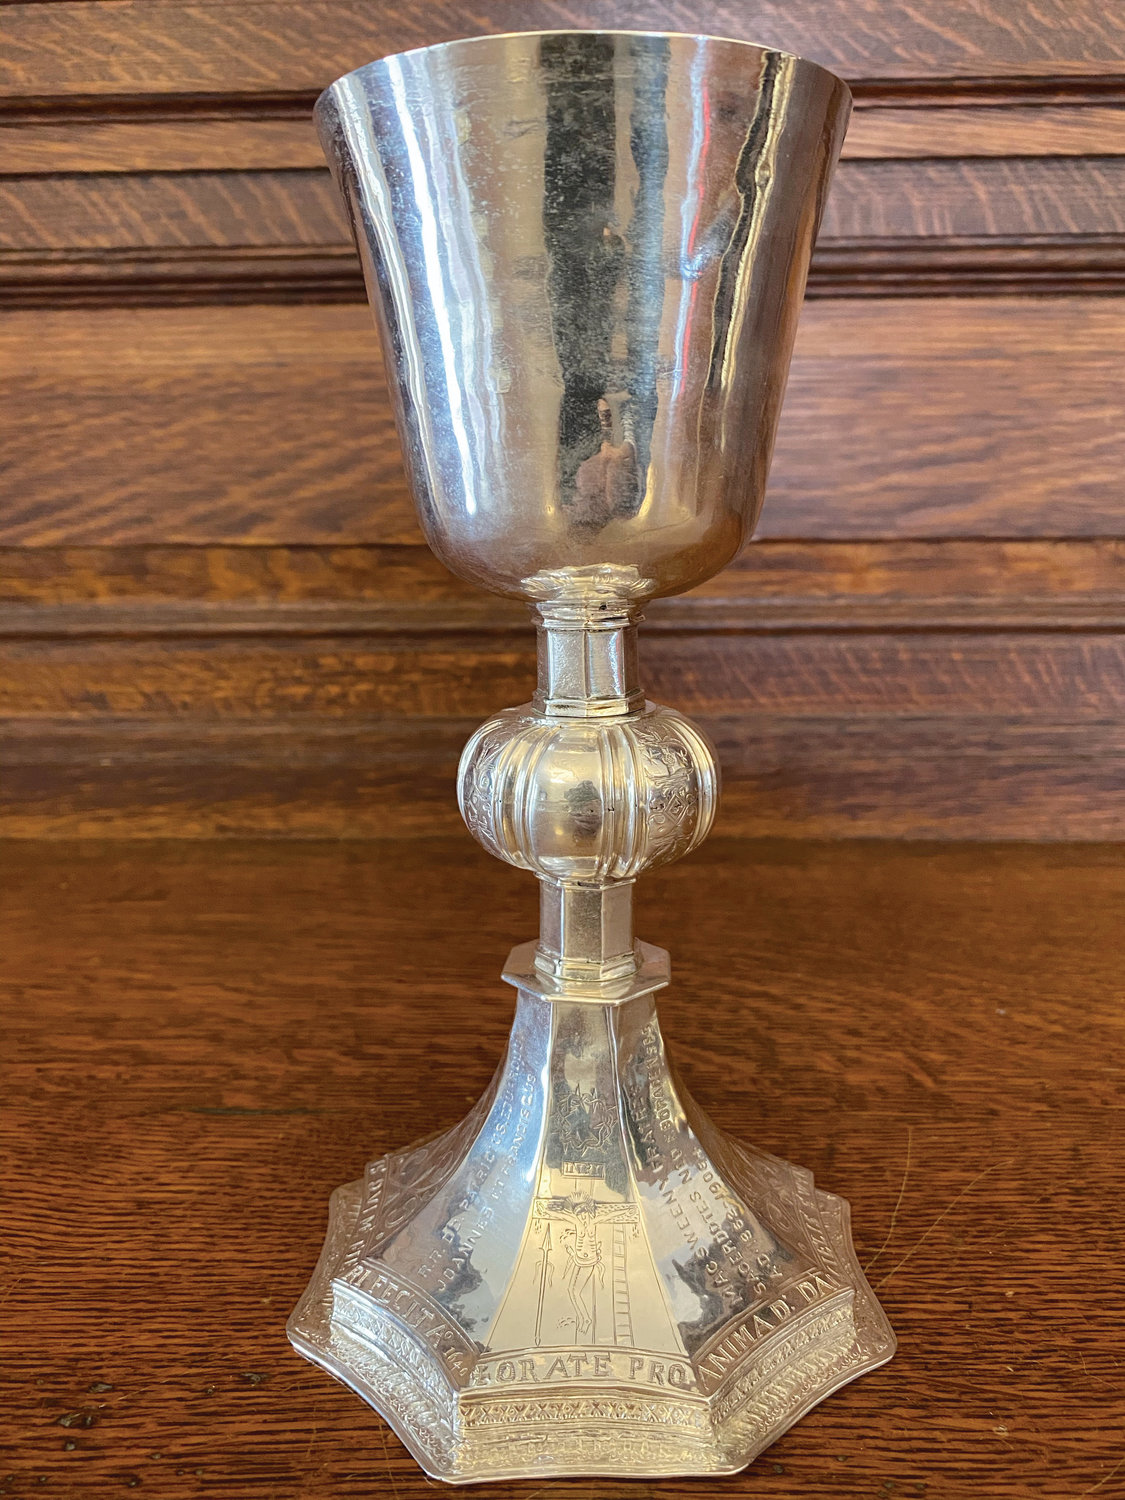 The MacSwiney Chalice, which dates back to 1640 in Ireland, was donated to St. Joseph’s Seminary in Dunwoodie in 1908 and has been used to celebrate St. Patrick’s Day Mass in St. Patrick’s Cathedral.